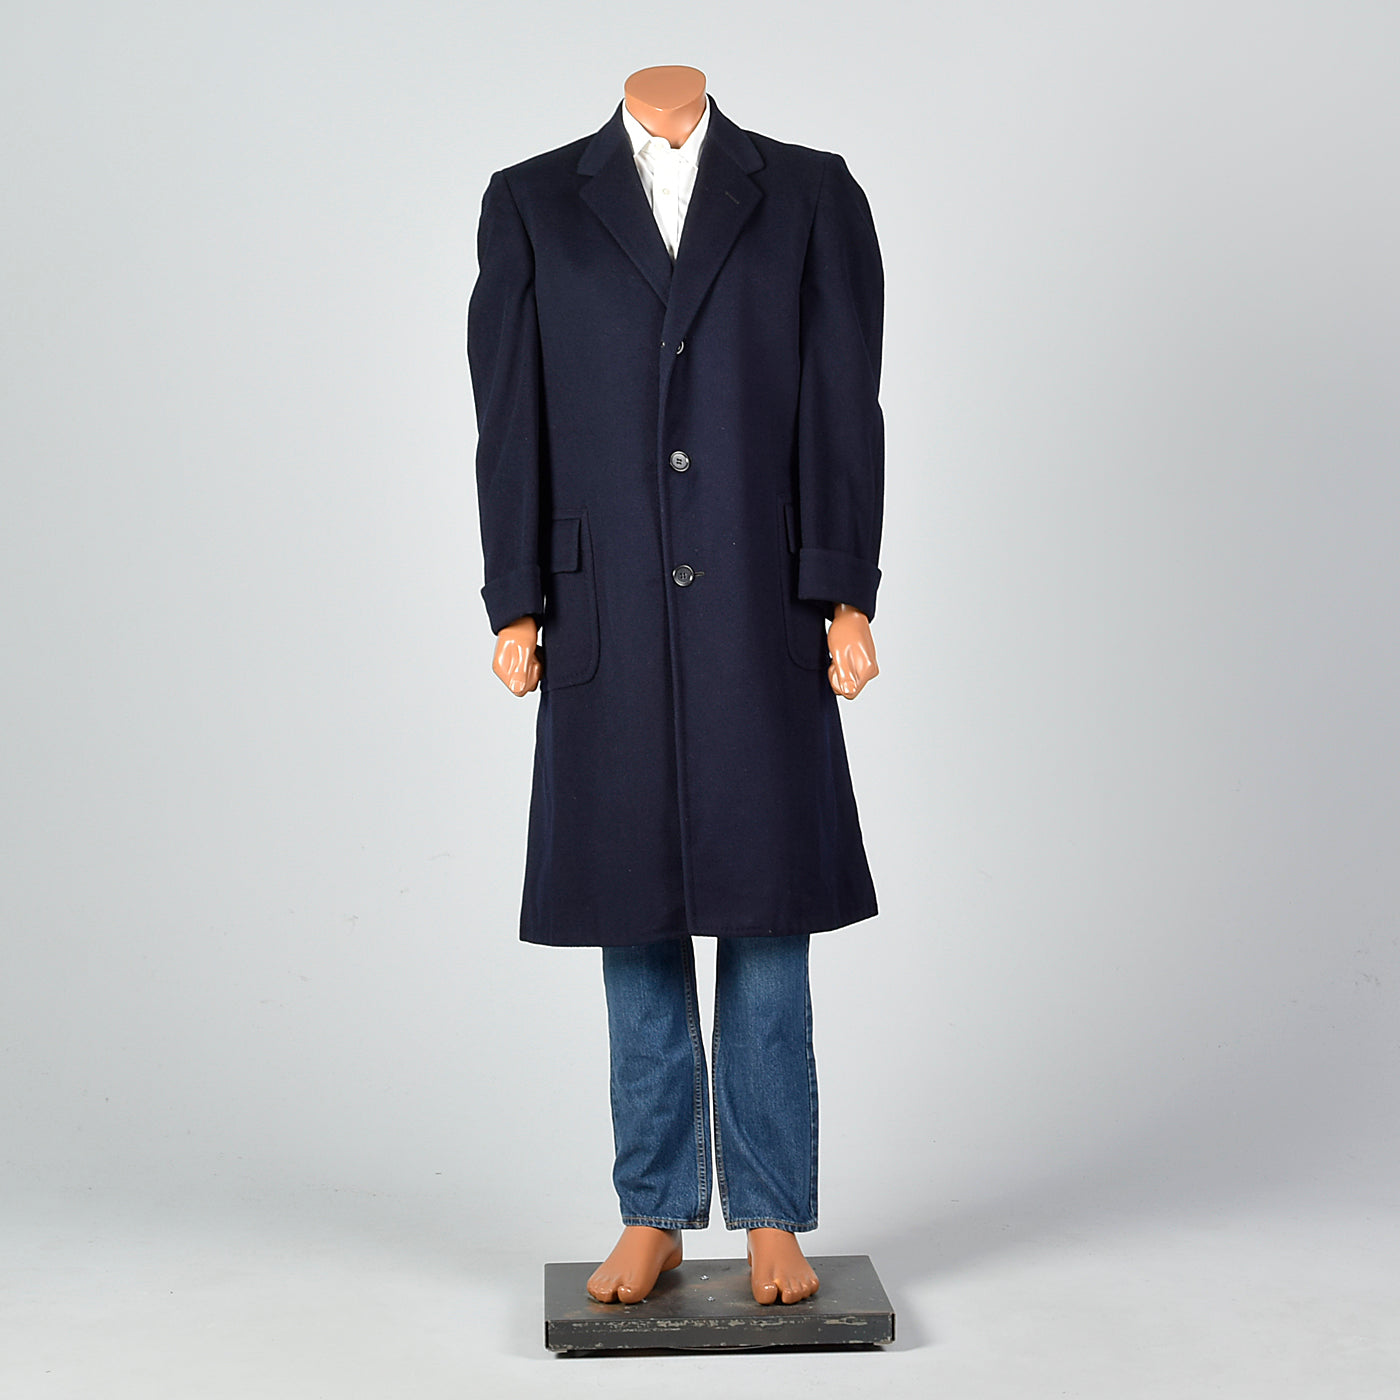 1950s Mens Wool and Cashmere Blend Navy Coat